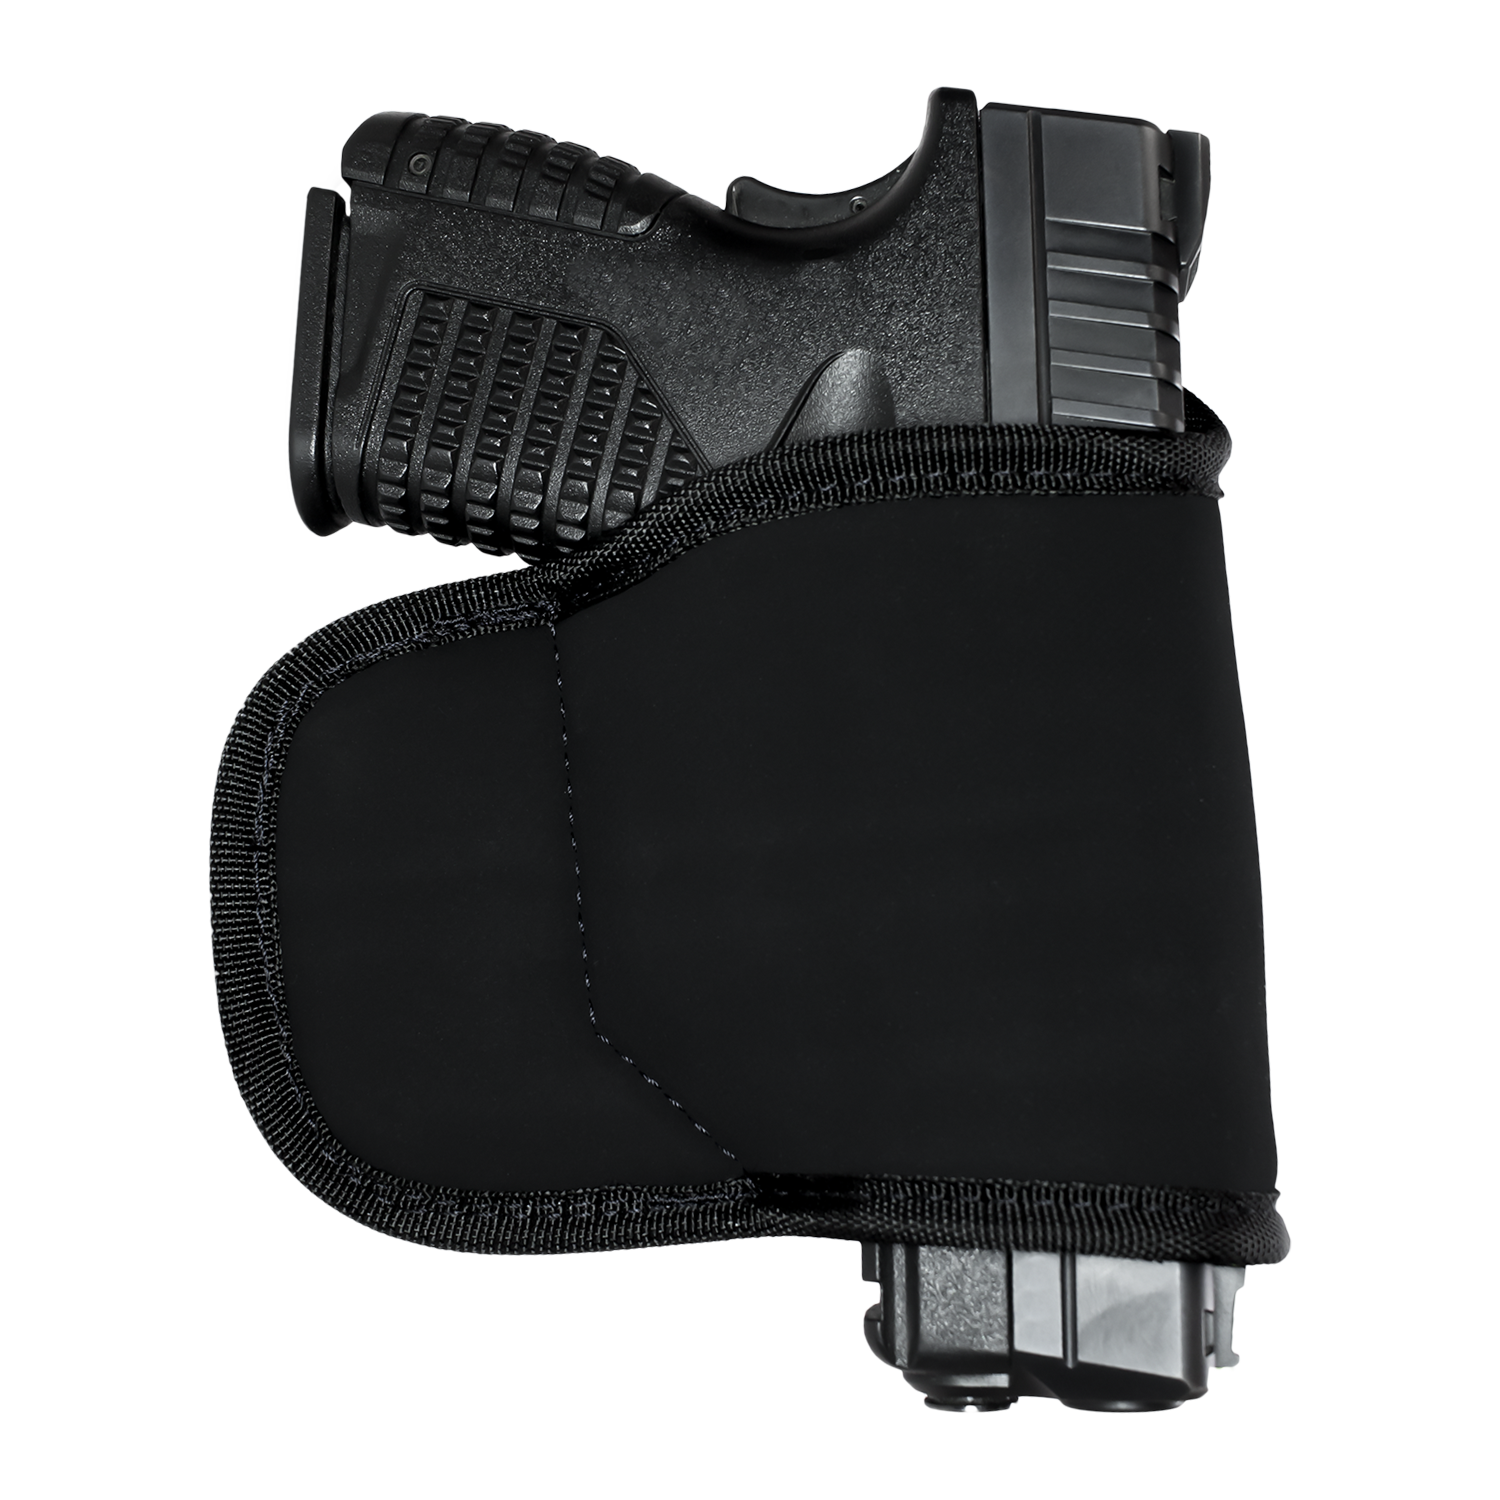 Carbon Fiber Thigh Gun Holsters for GLOCK Hunting for sale